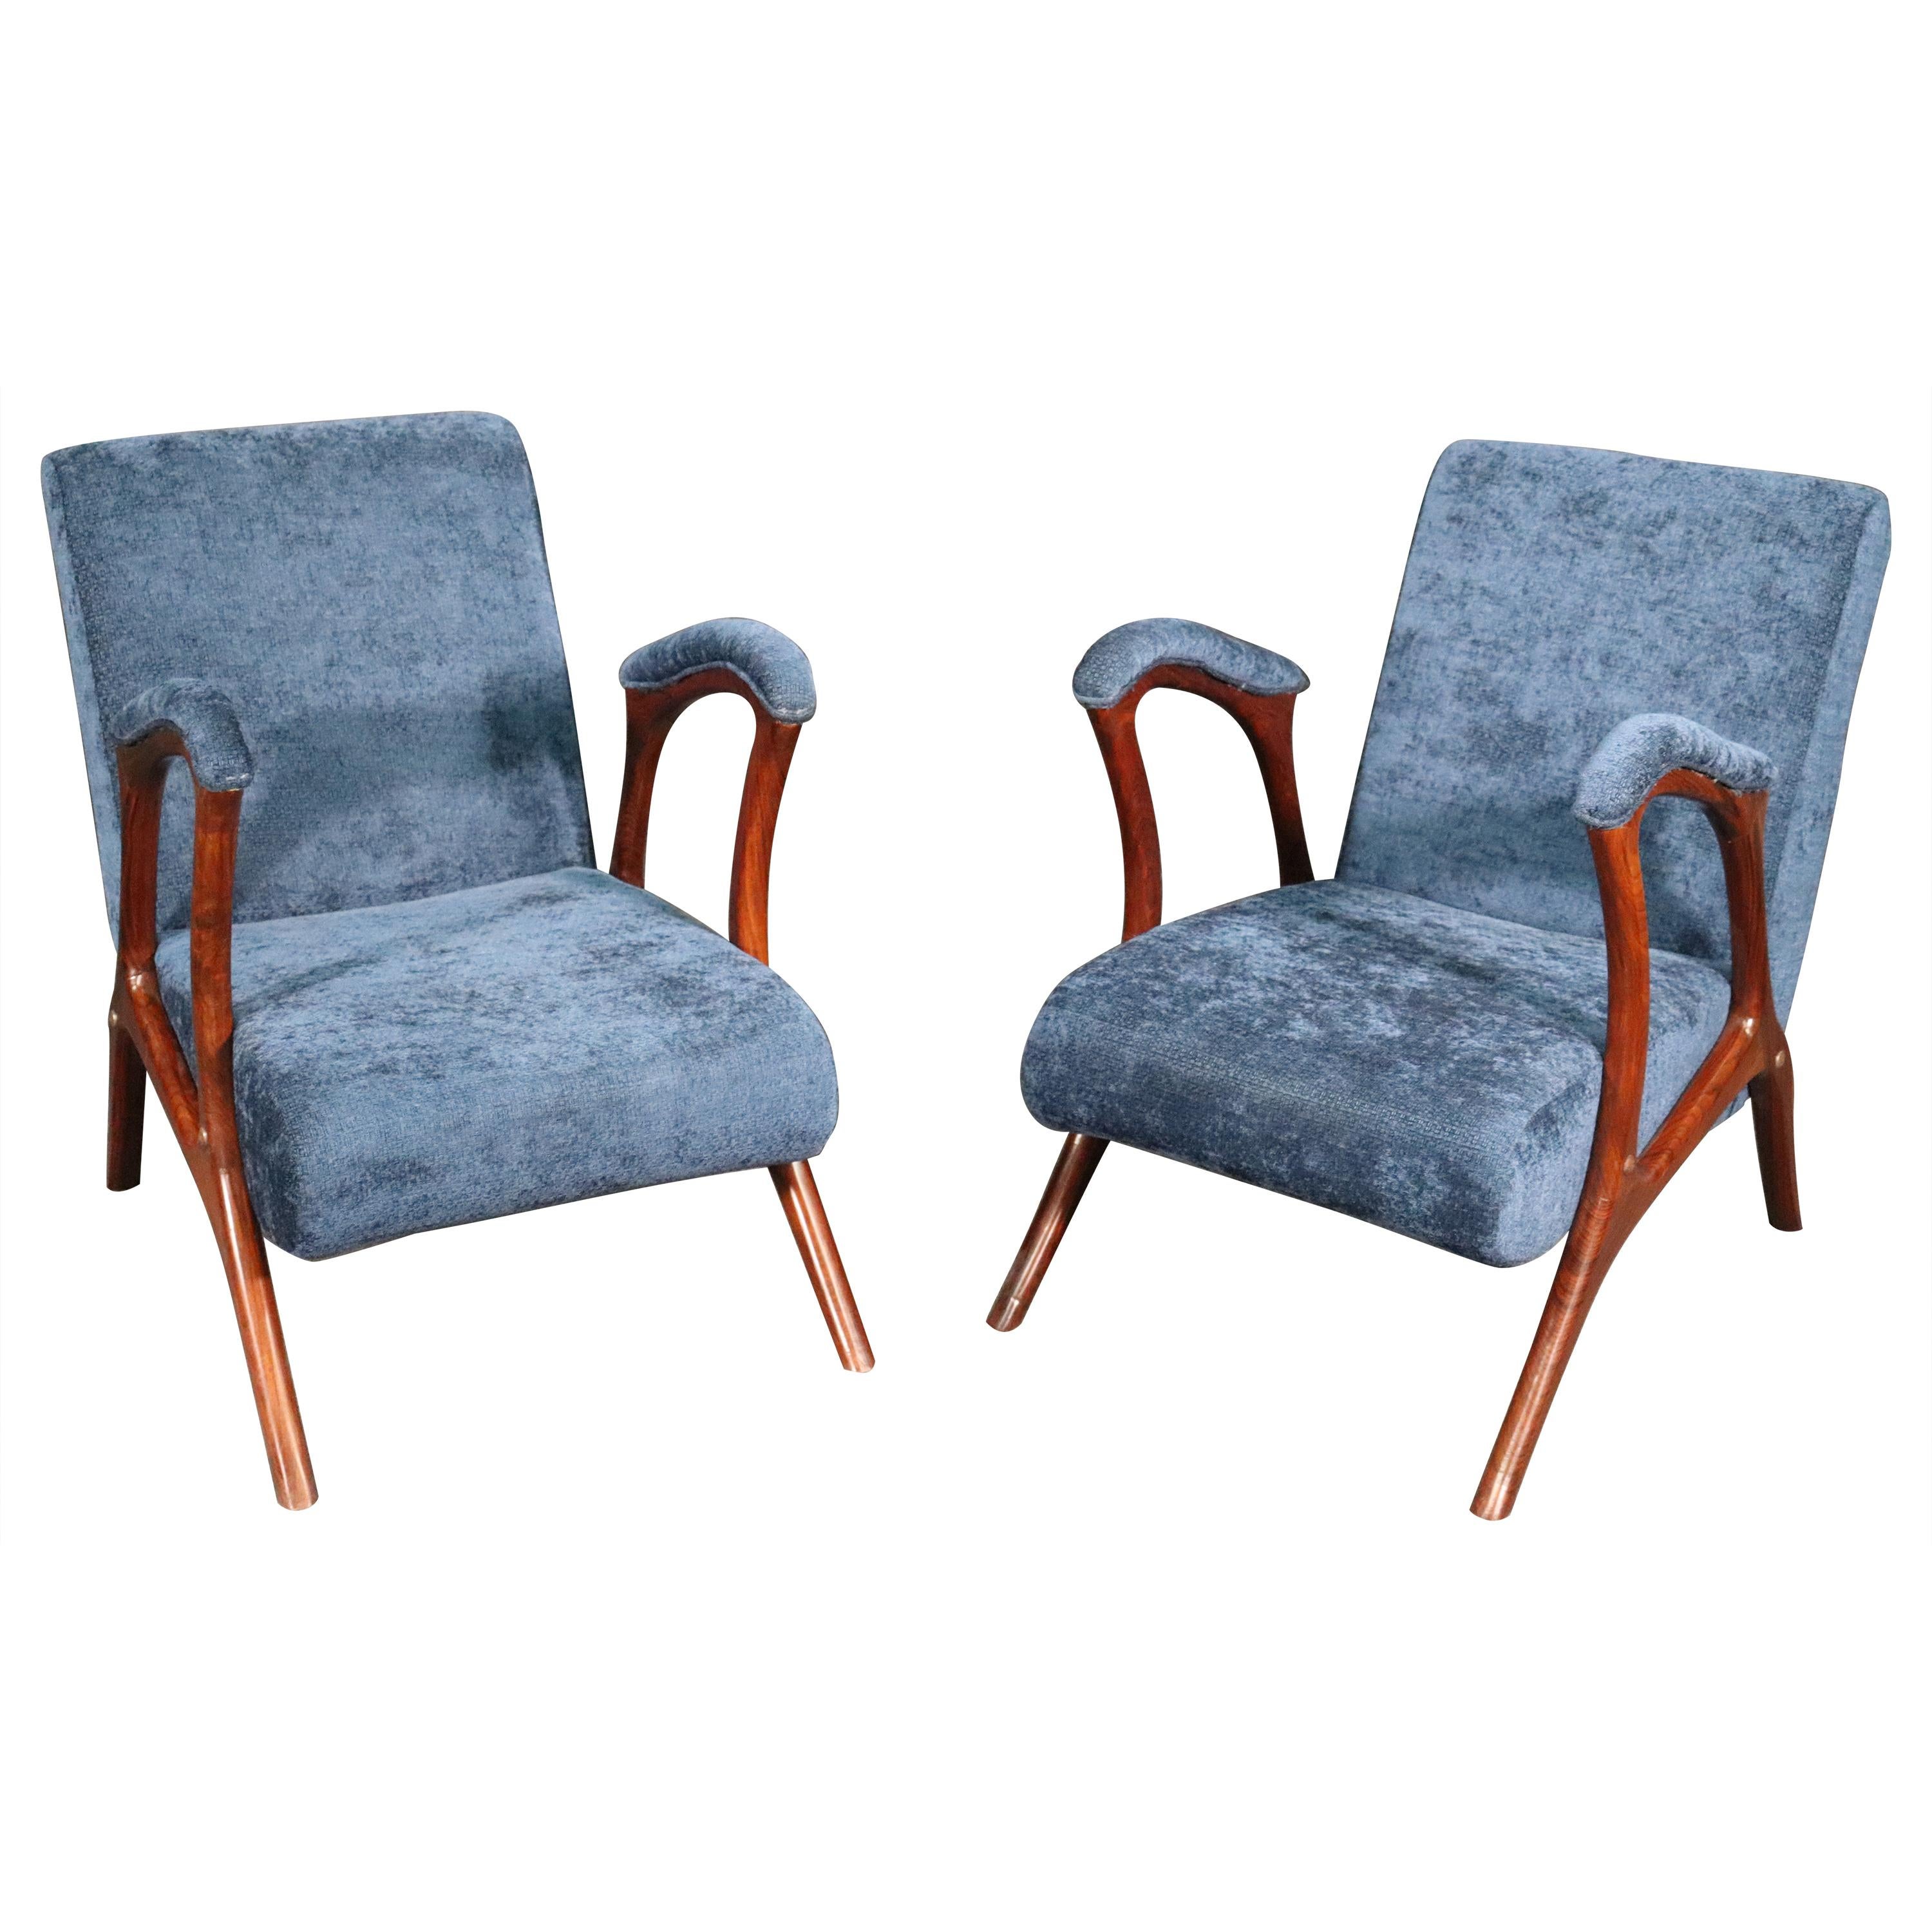 Pair of Solid Rosewood Italian Gio Ponti Style Mid-Century Modern Club Chairs